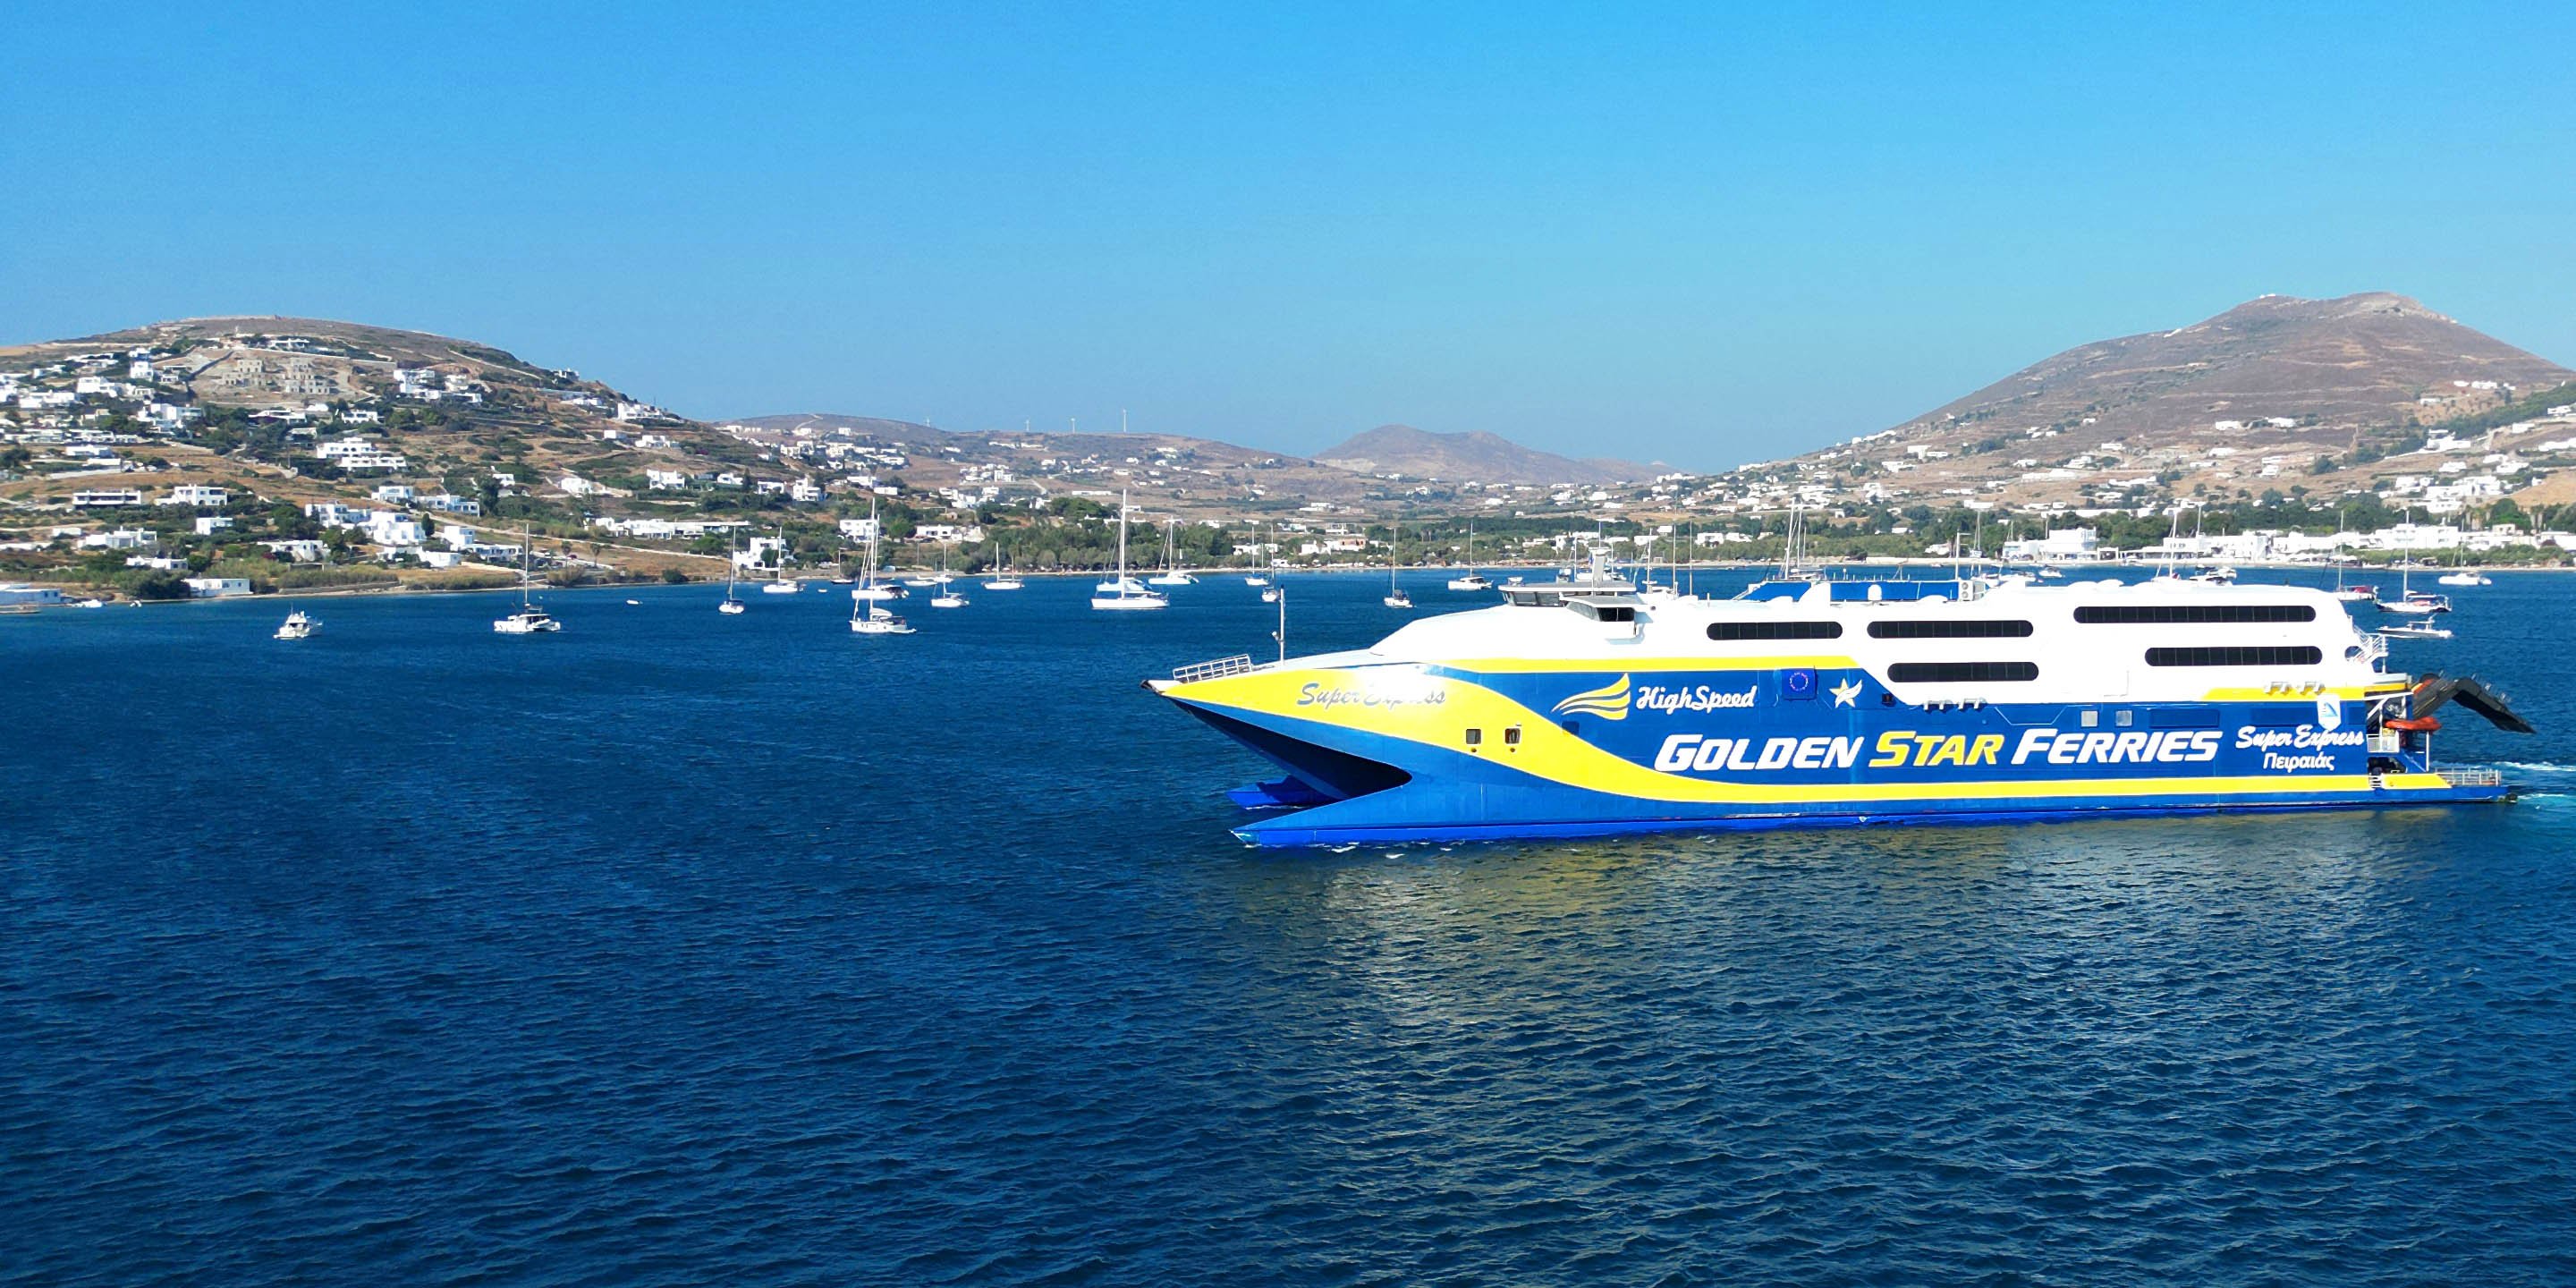 The high-speed ferry SuperExpress of Golden Star Ferries doing the route between Paros and Mykonos